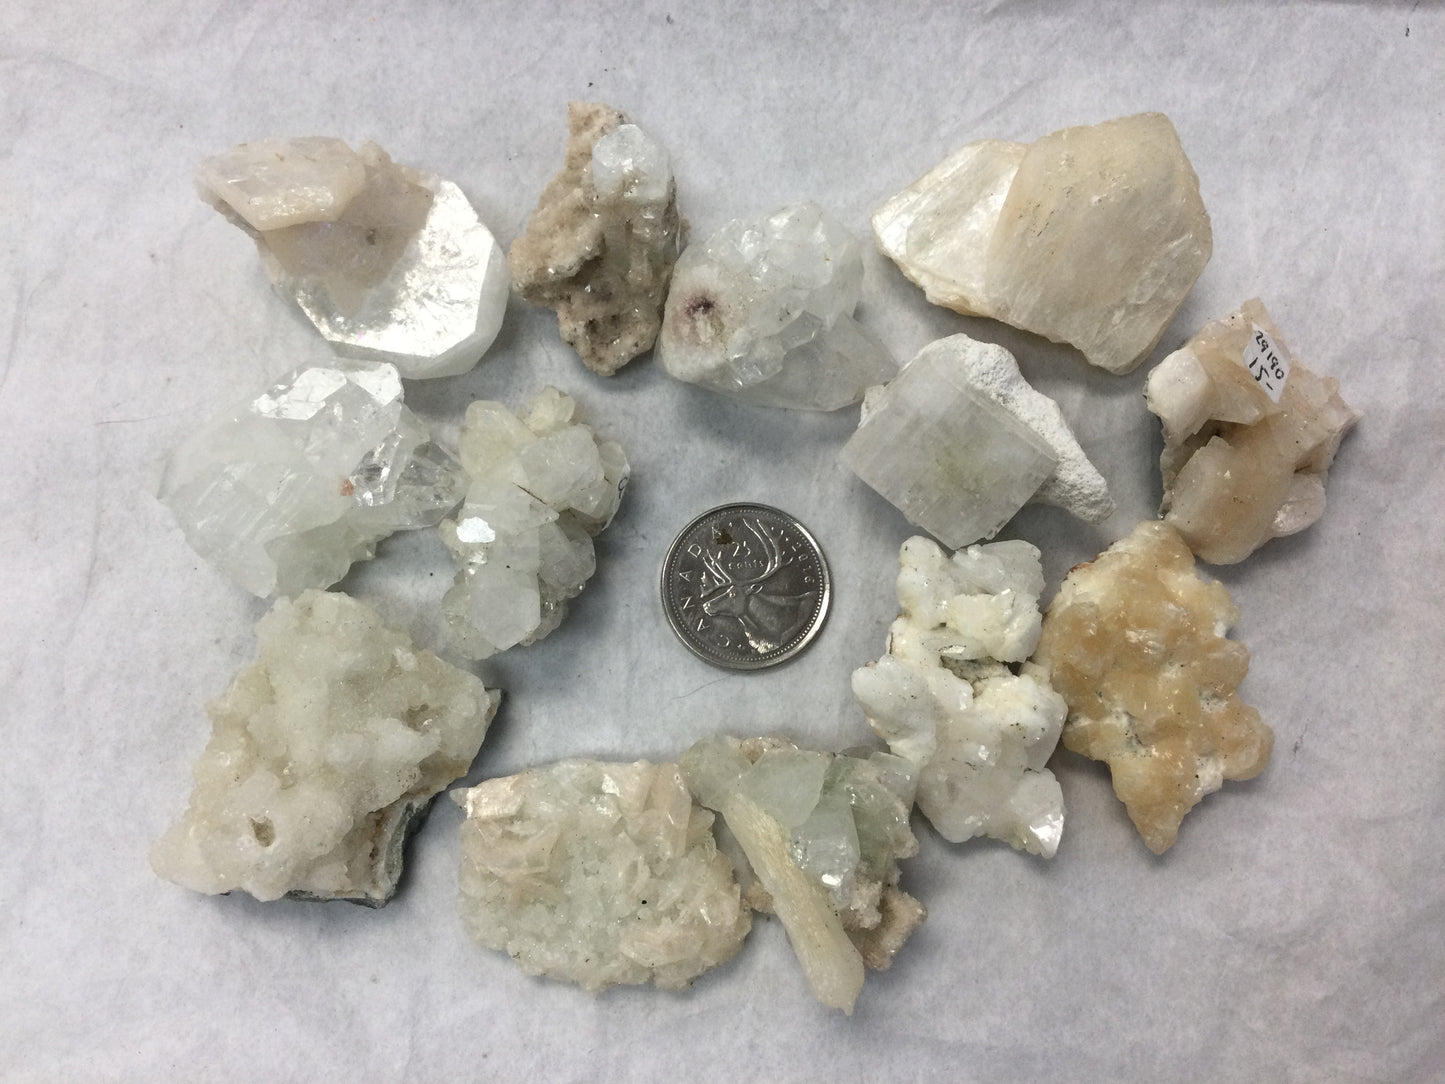 Apophyllite and Stilbite, small clusters